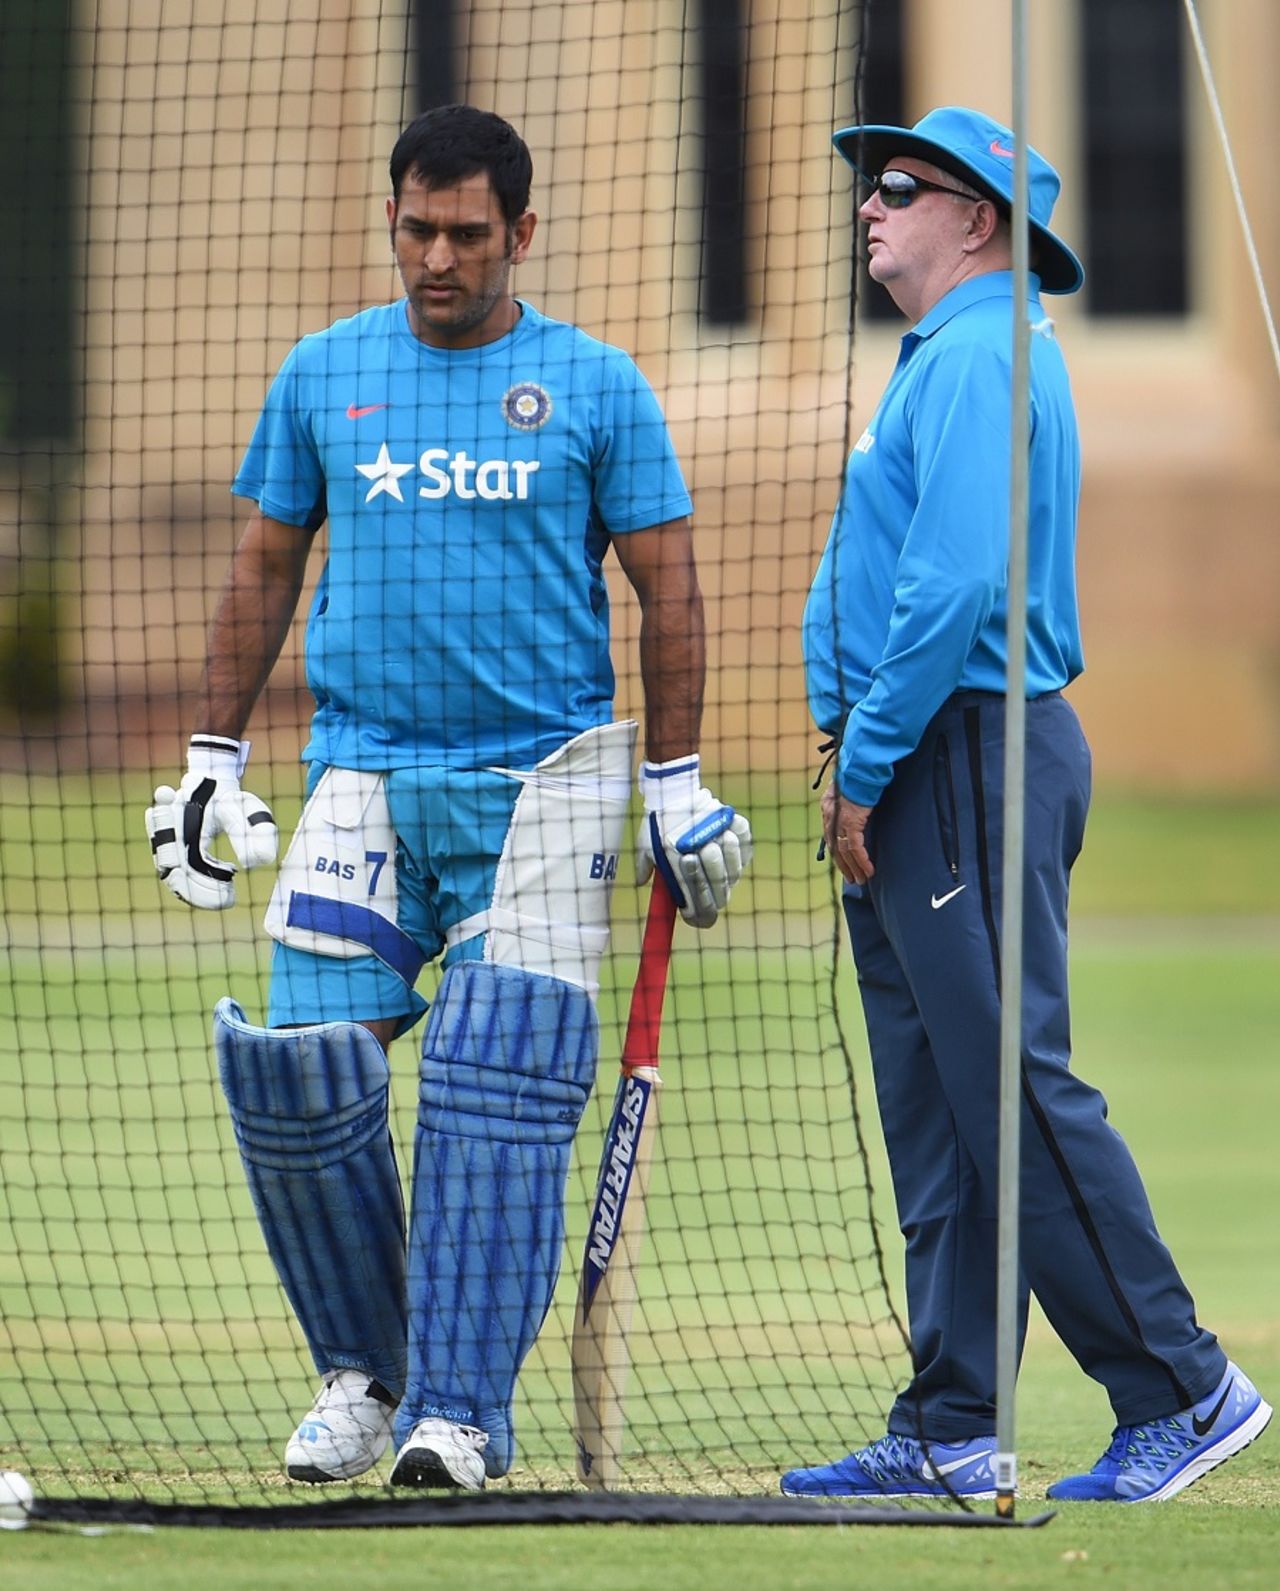 MS Dhoni gets ready for a hit in the nets as Duncan Fletcher looks on, World Cup 2015, Adelaide, February 13, 2015